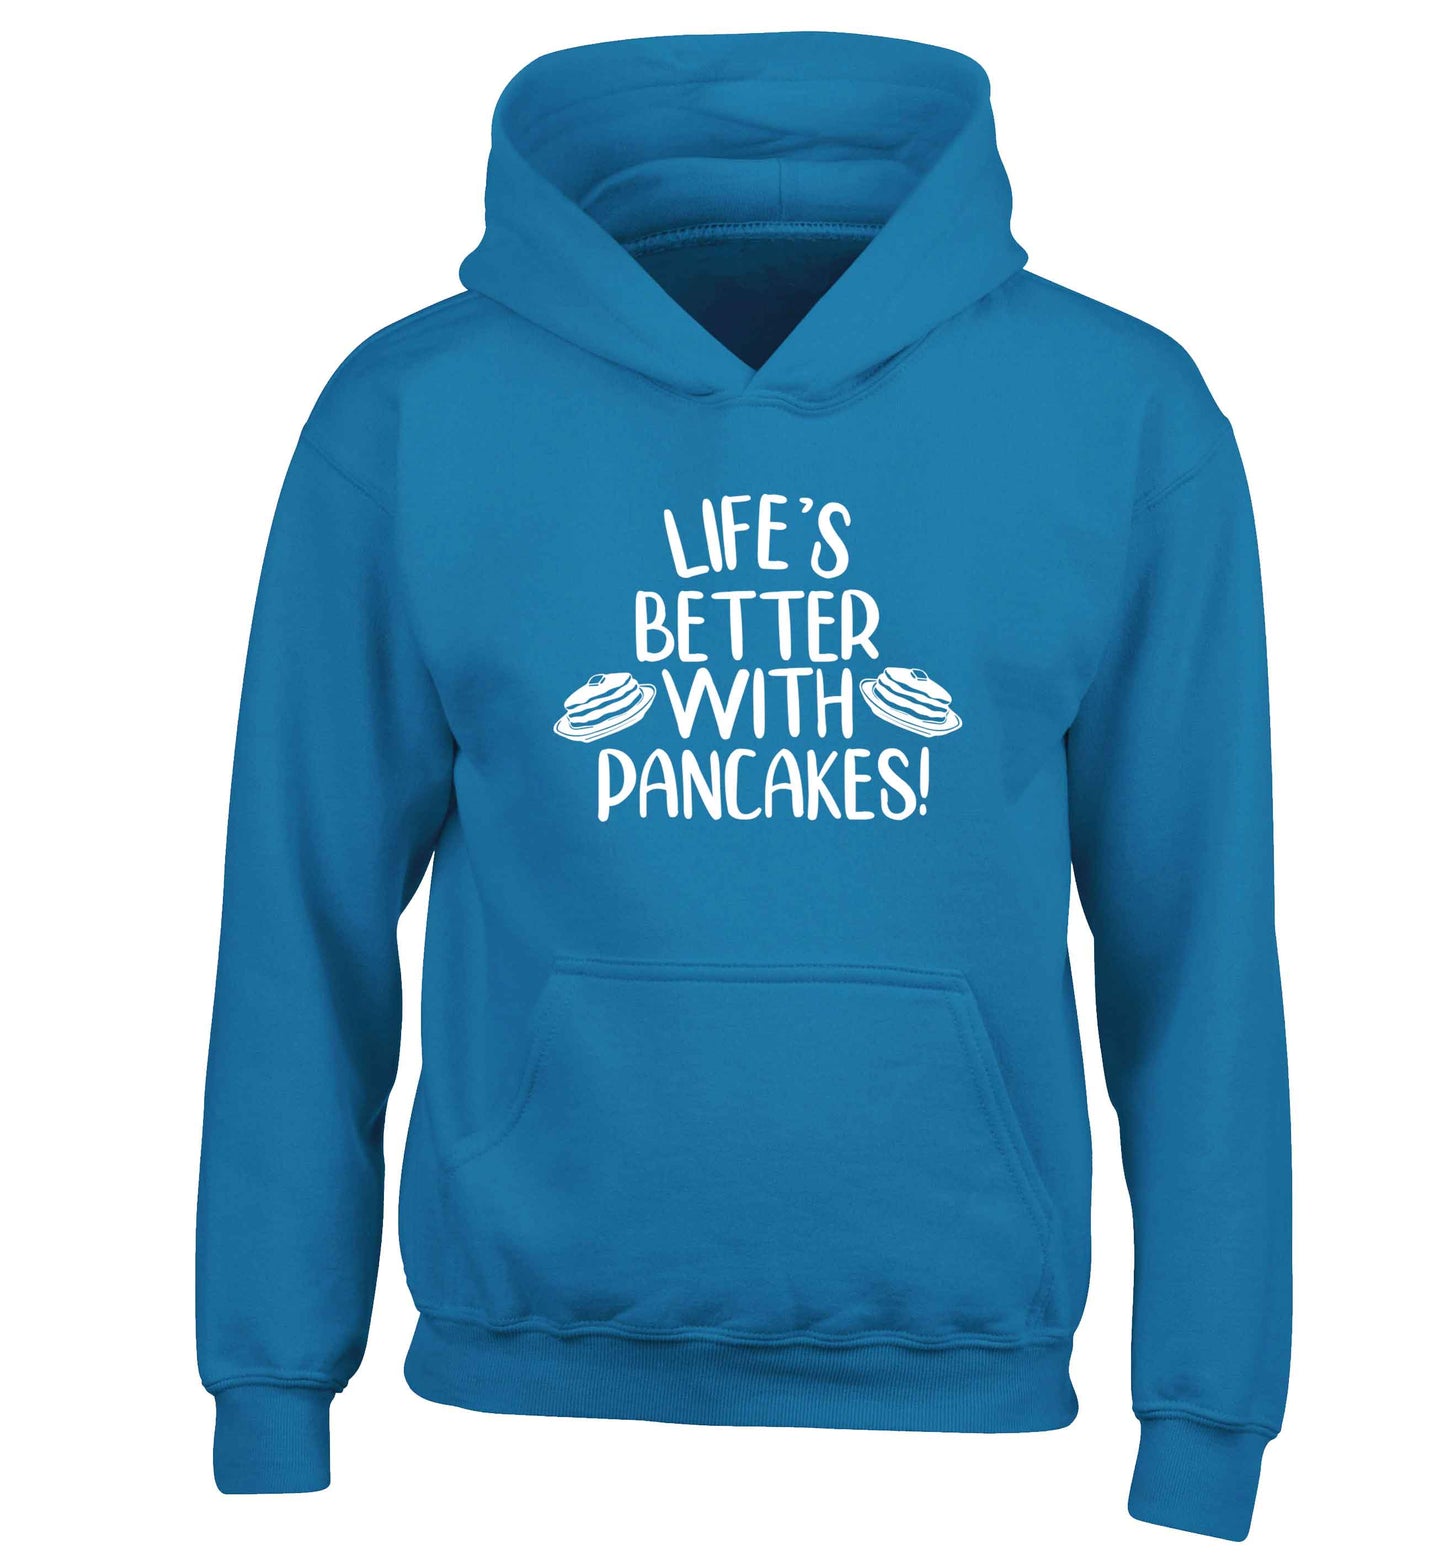 Life's better with pancakes children's blue hoodie 12-13 Years